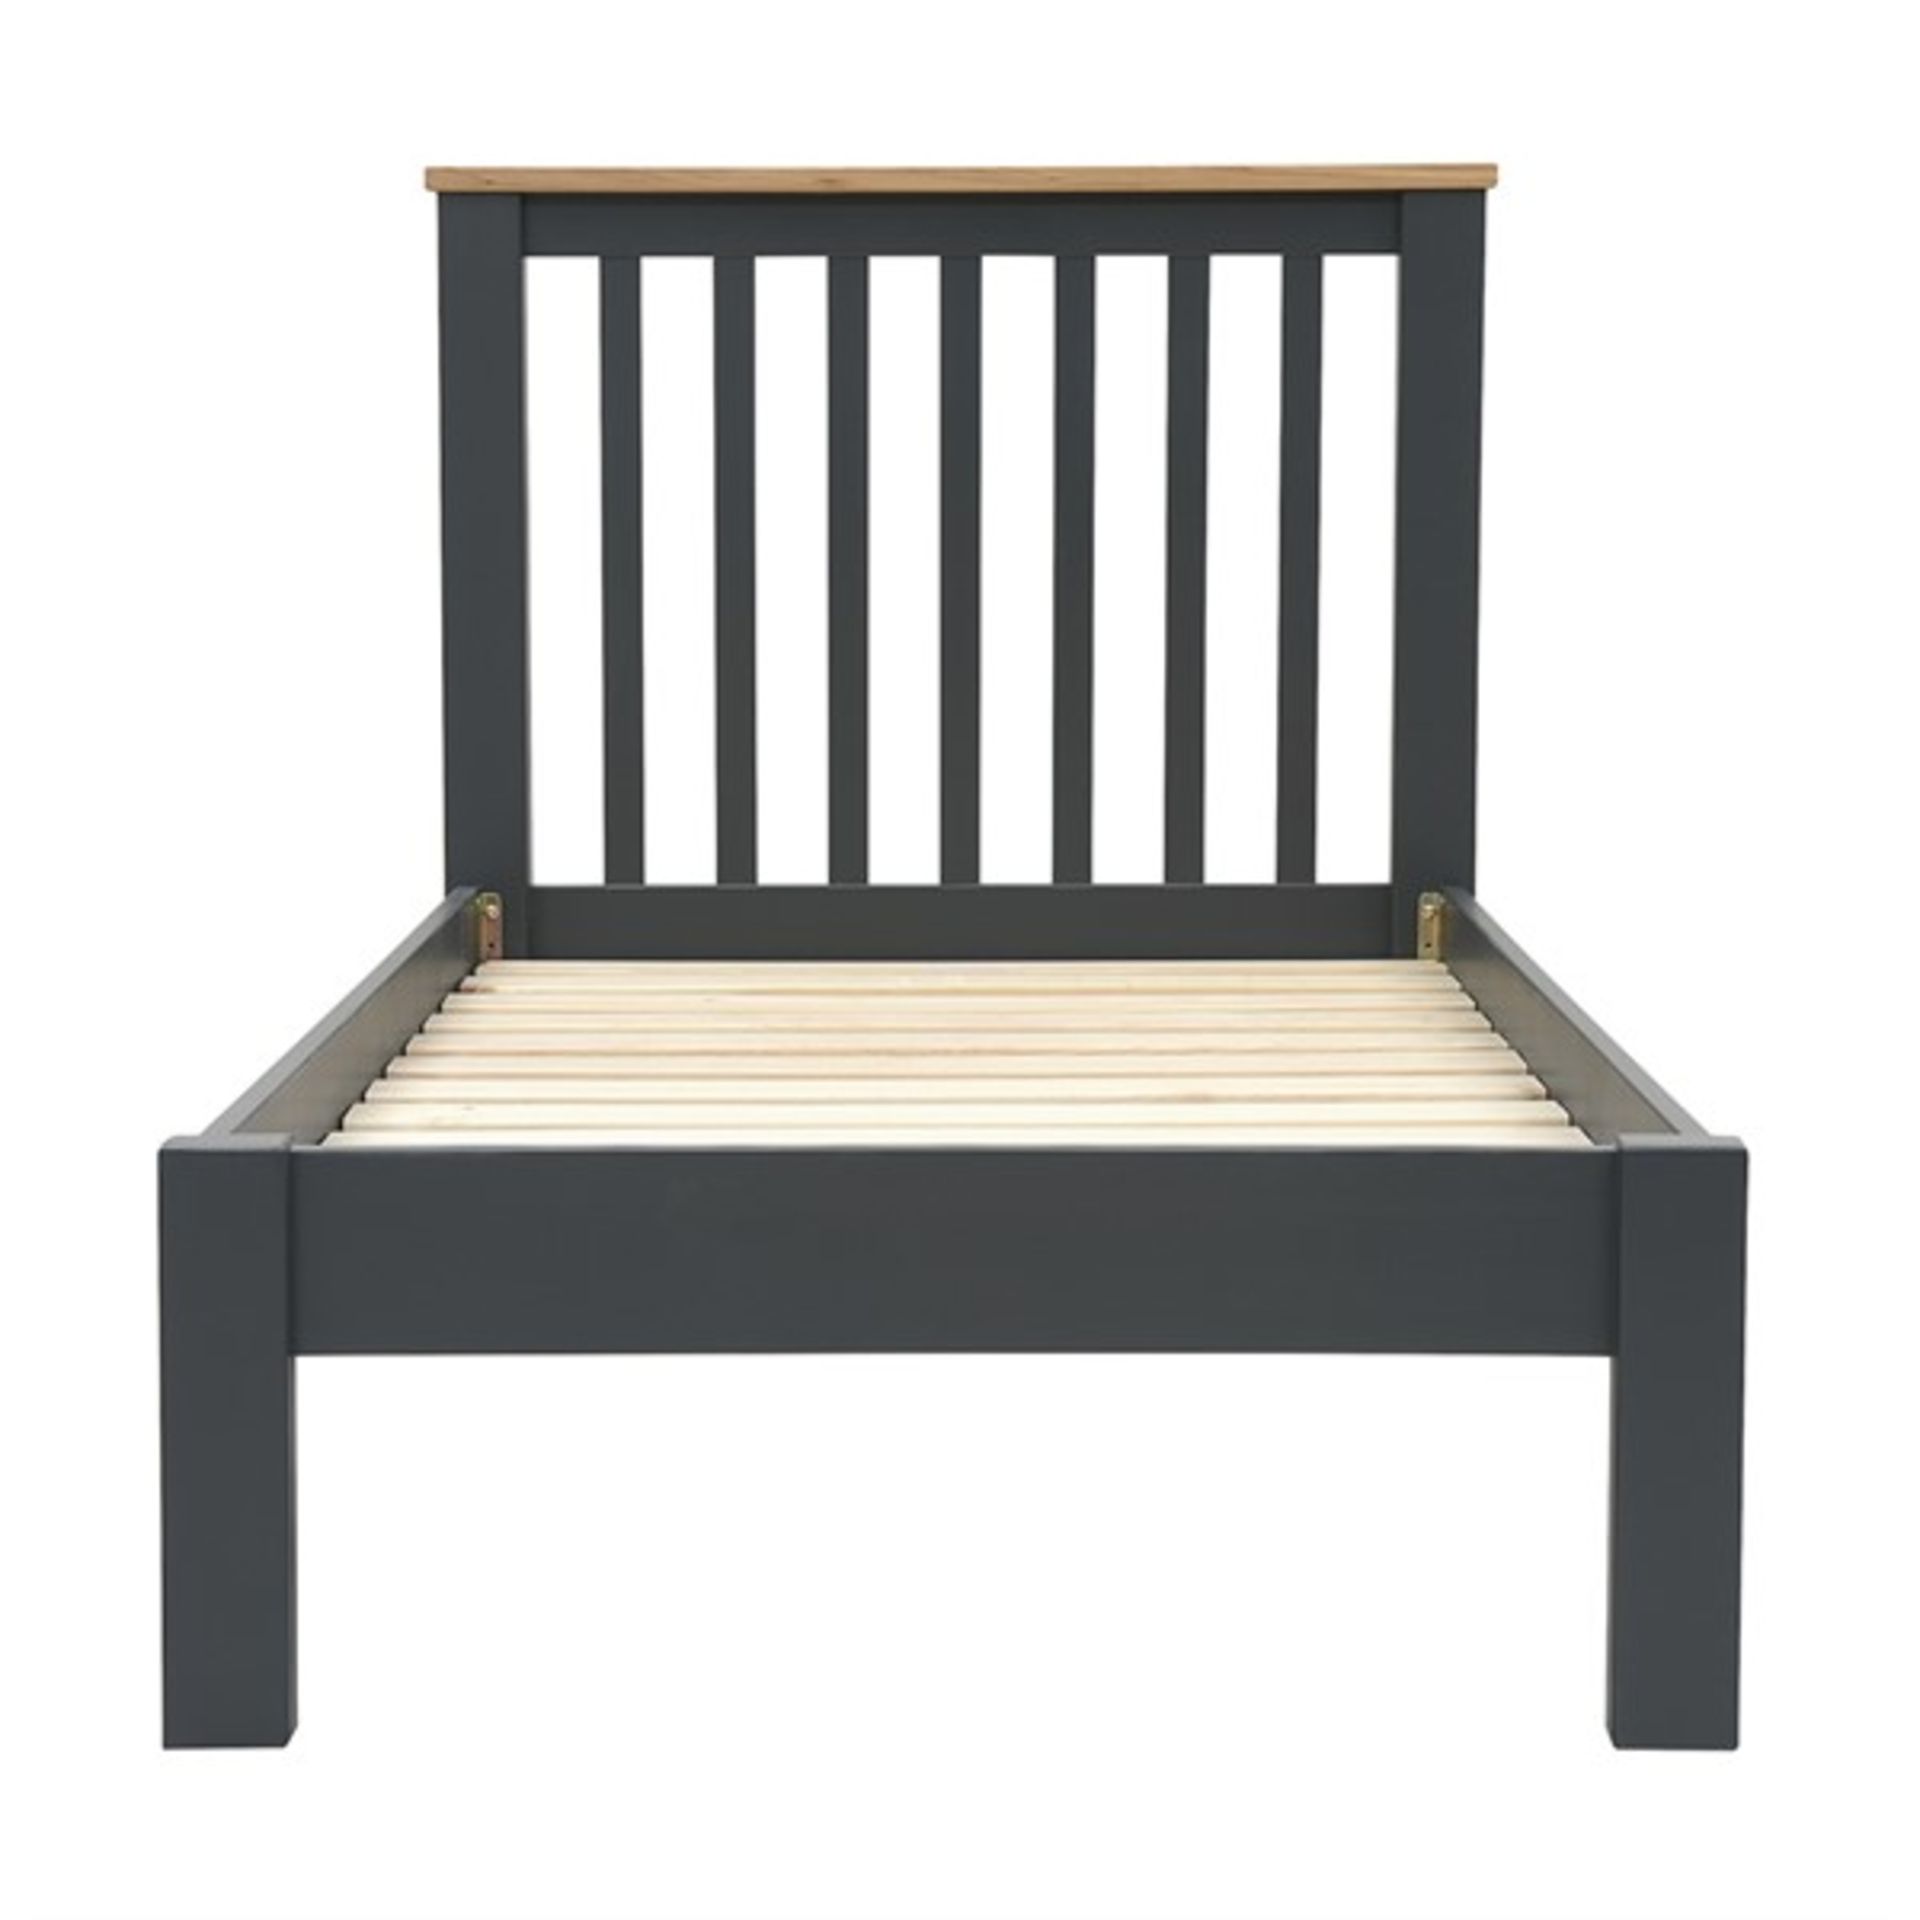 Cotswold Company Simply Cotswold Charcoal 3ft Single Bed RRP ?345.00Ideal for a guest room, this